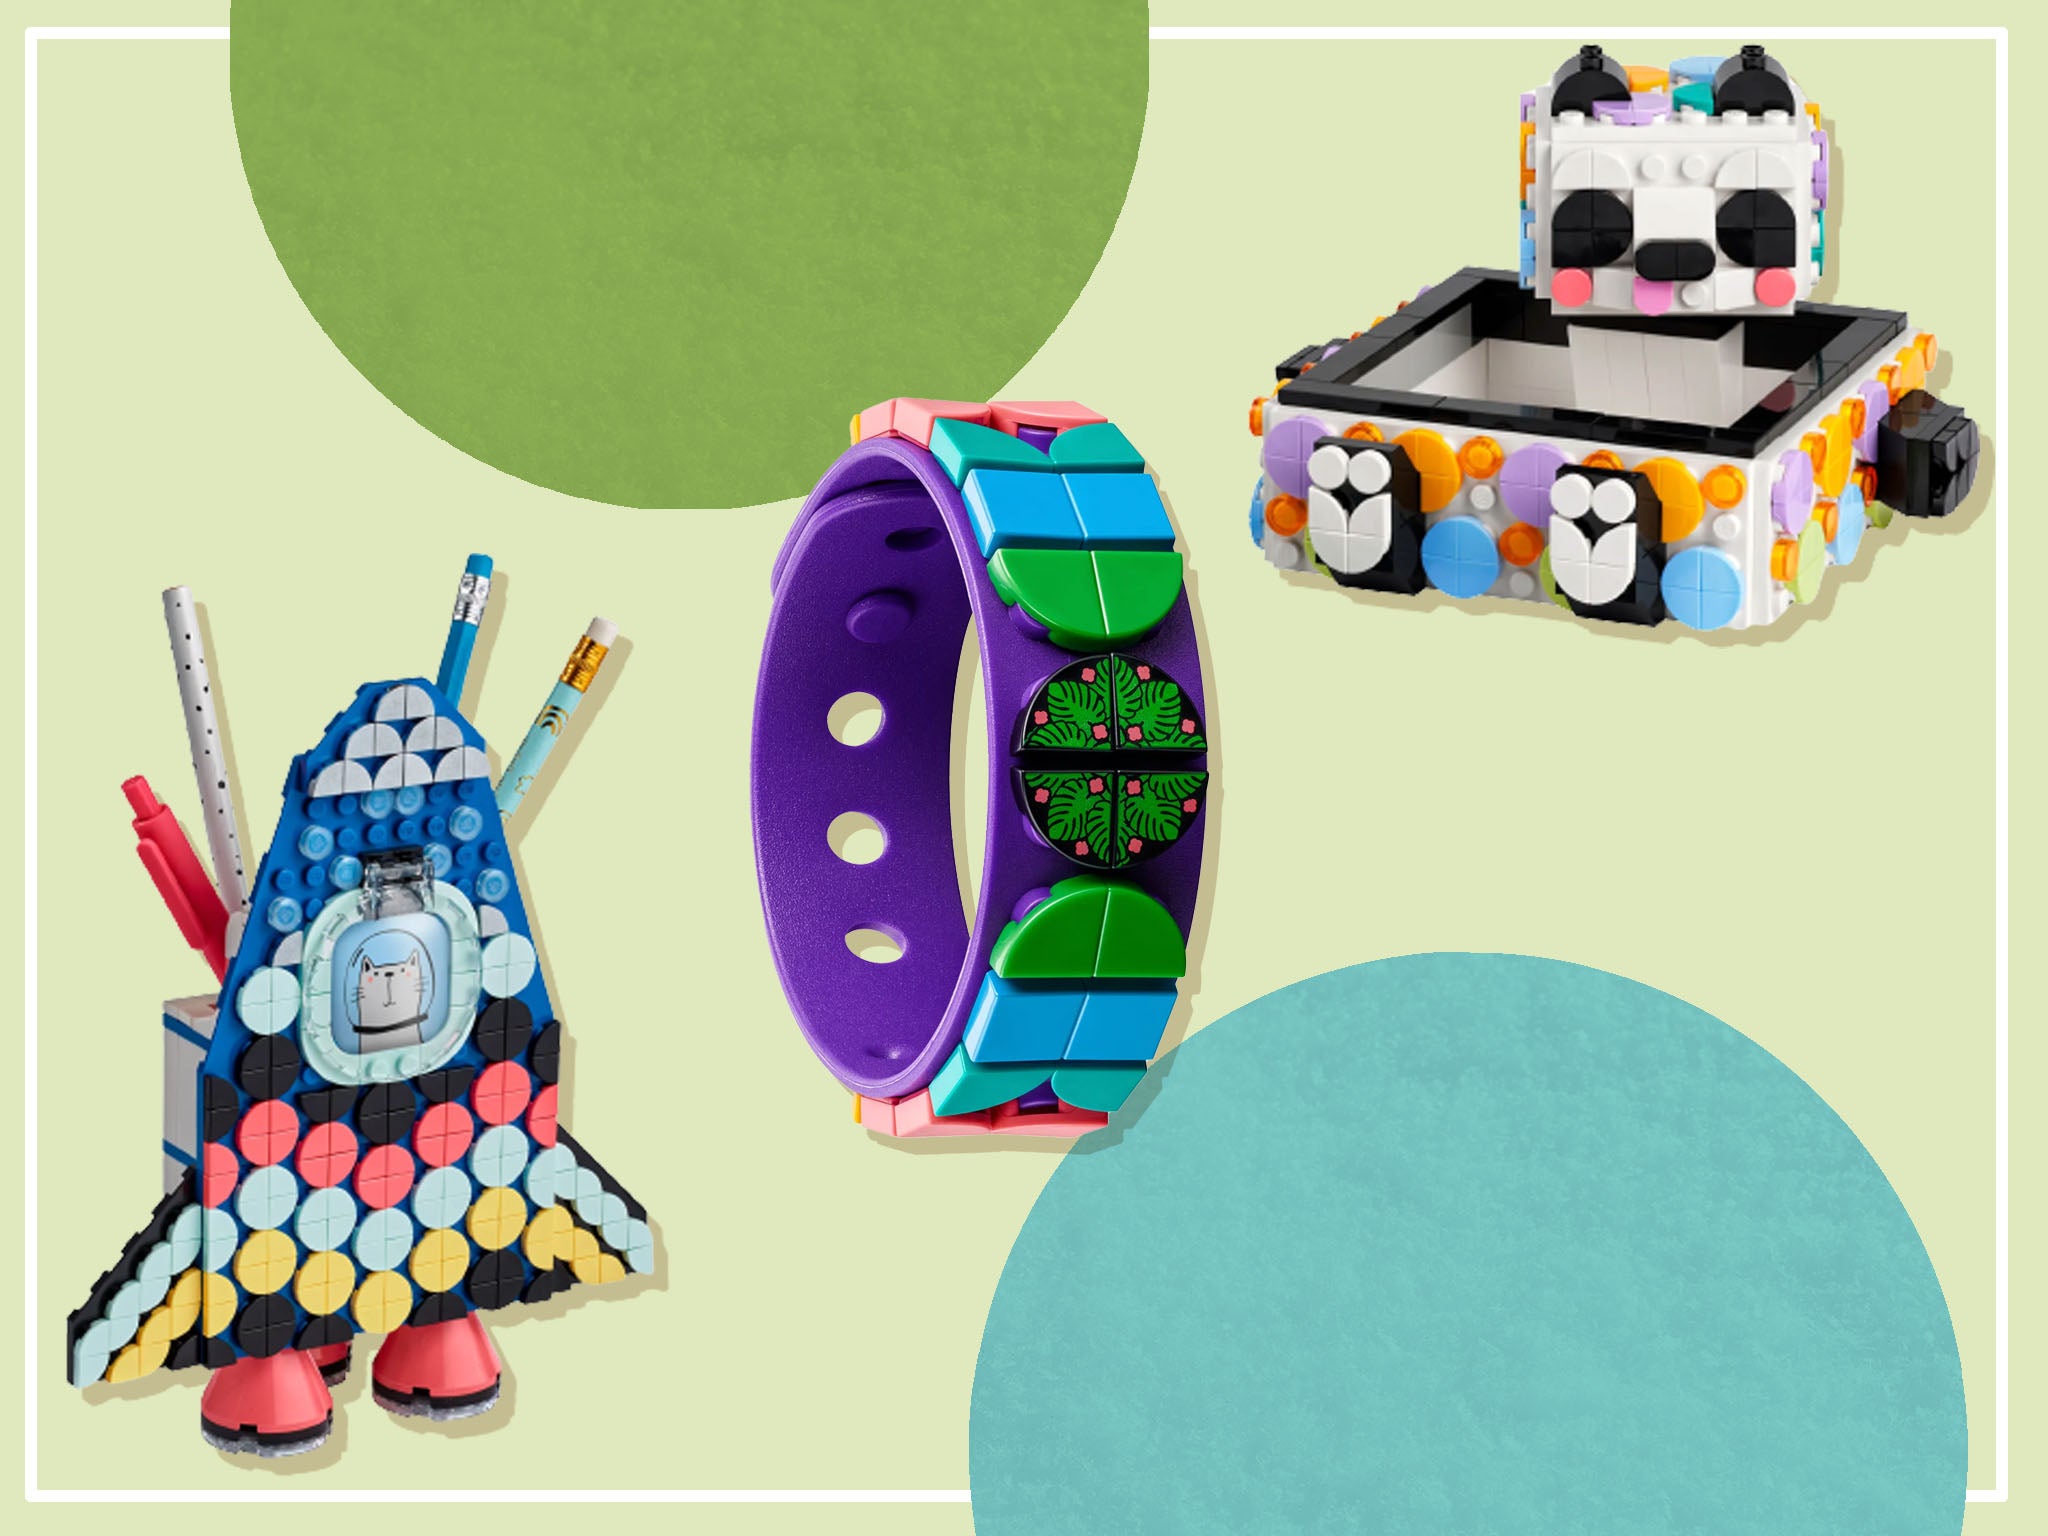 Little builders can choose from wearable designs too